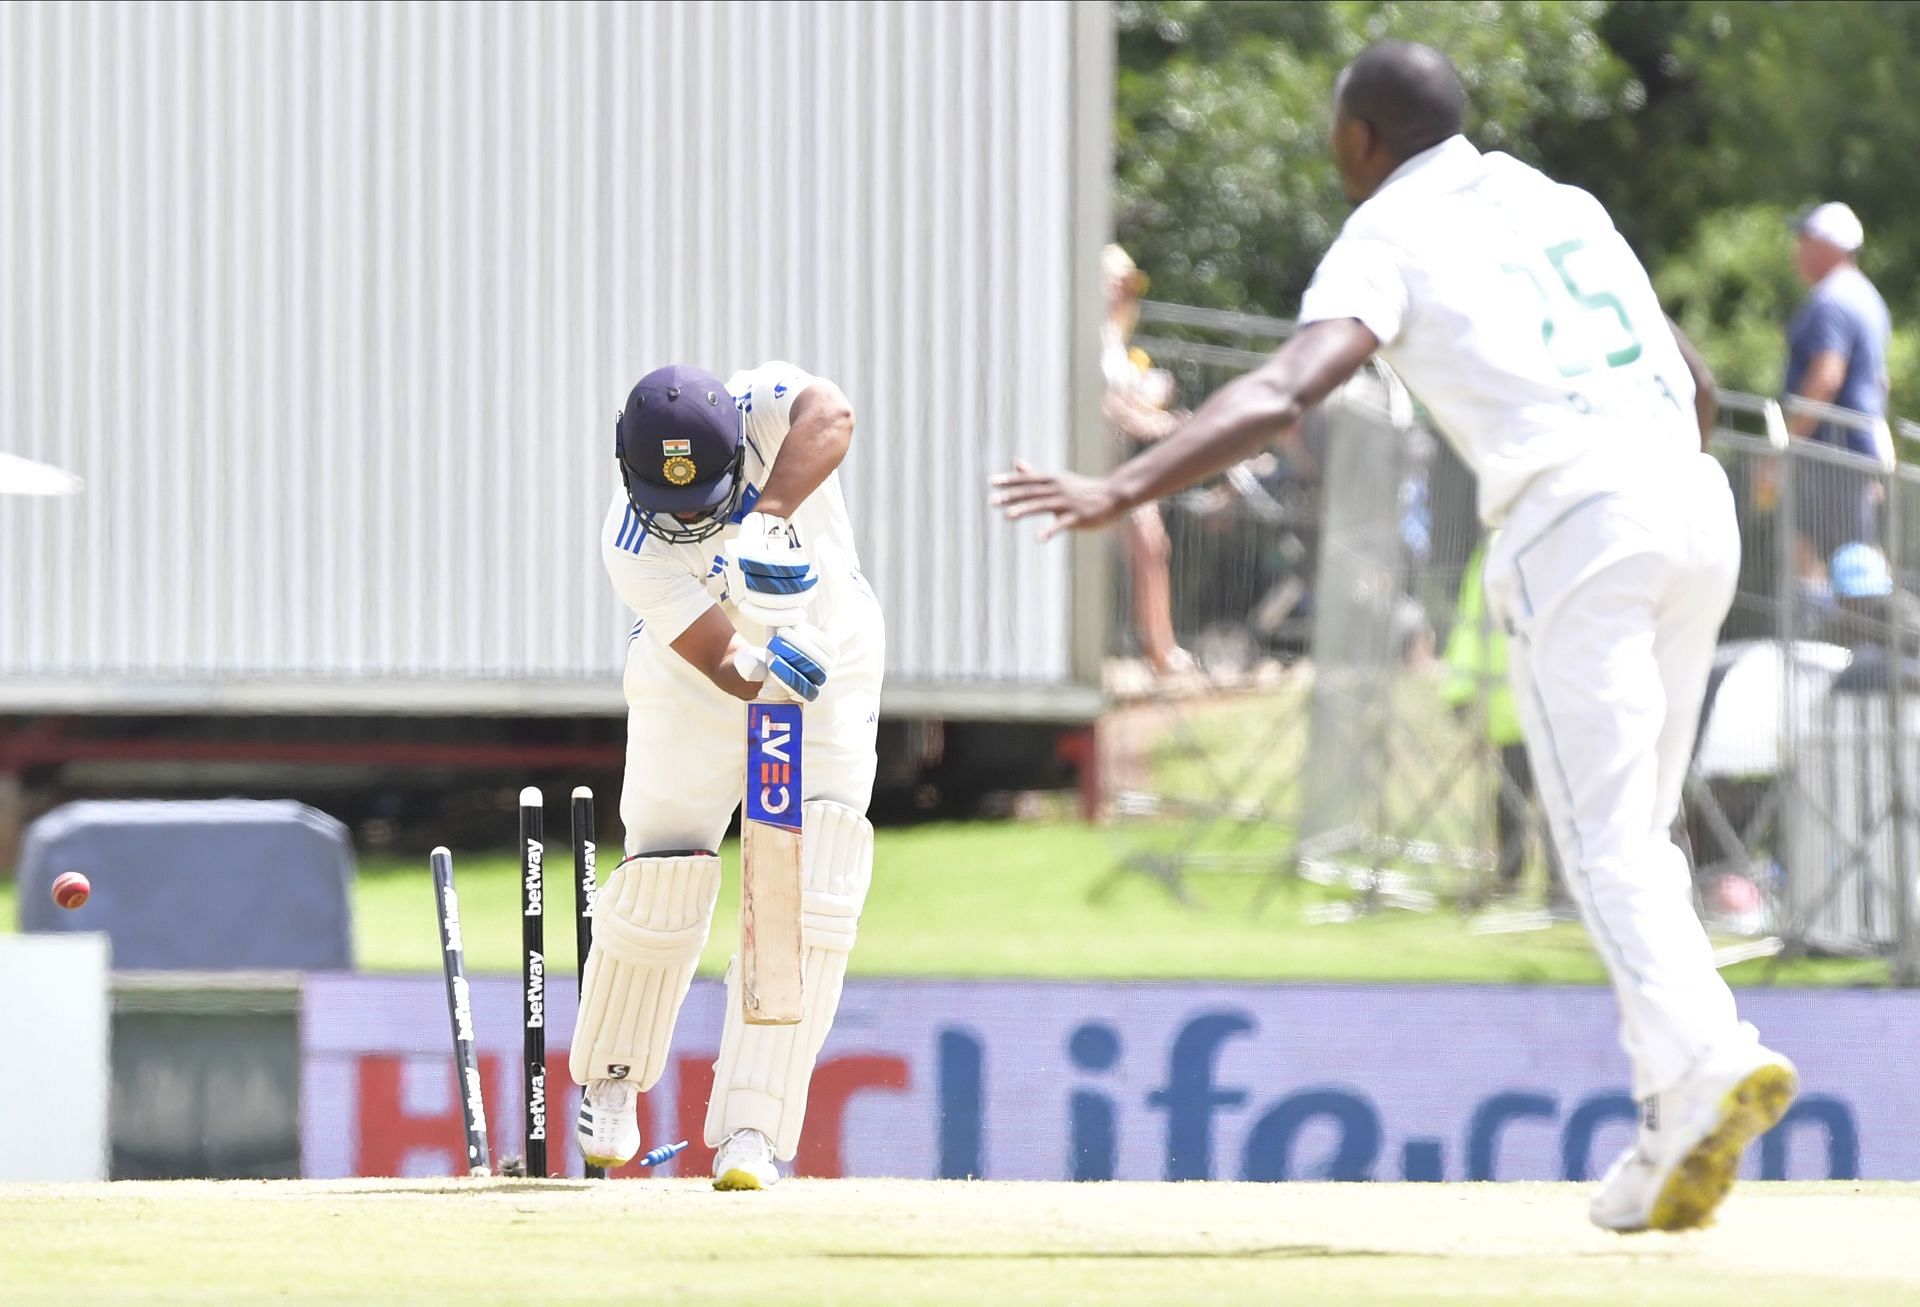 India were bowled out for 131 in the second innings of the Centurion Test. [P/C: AP]